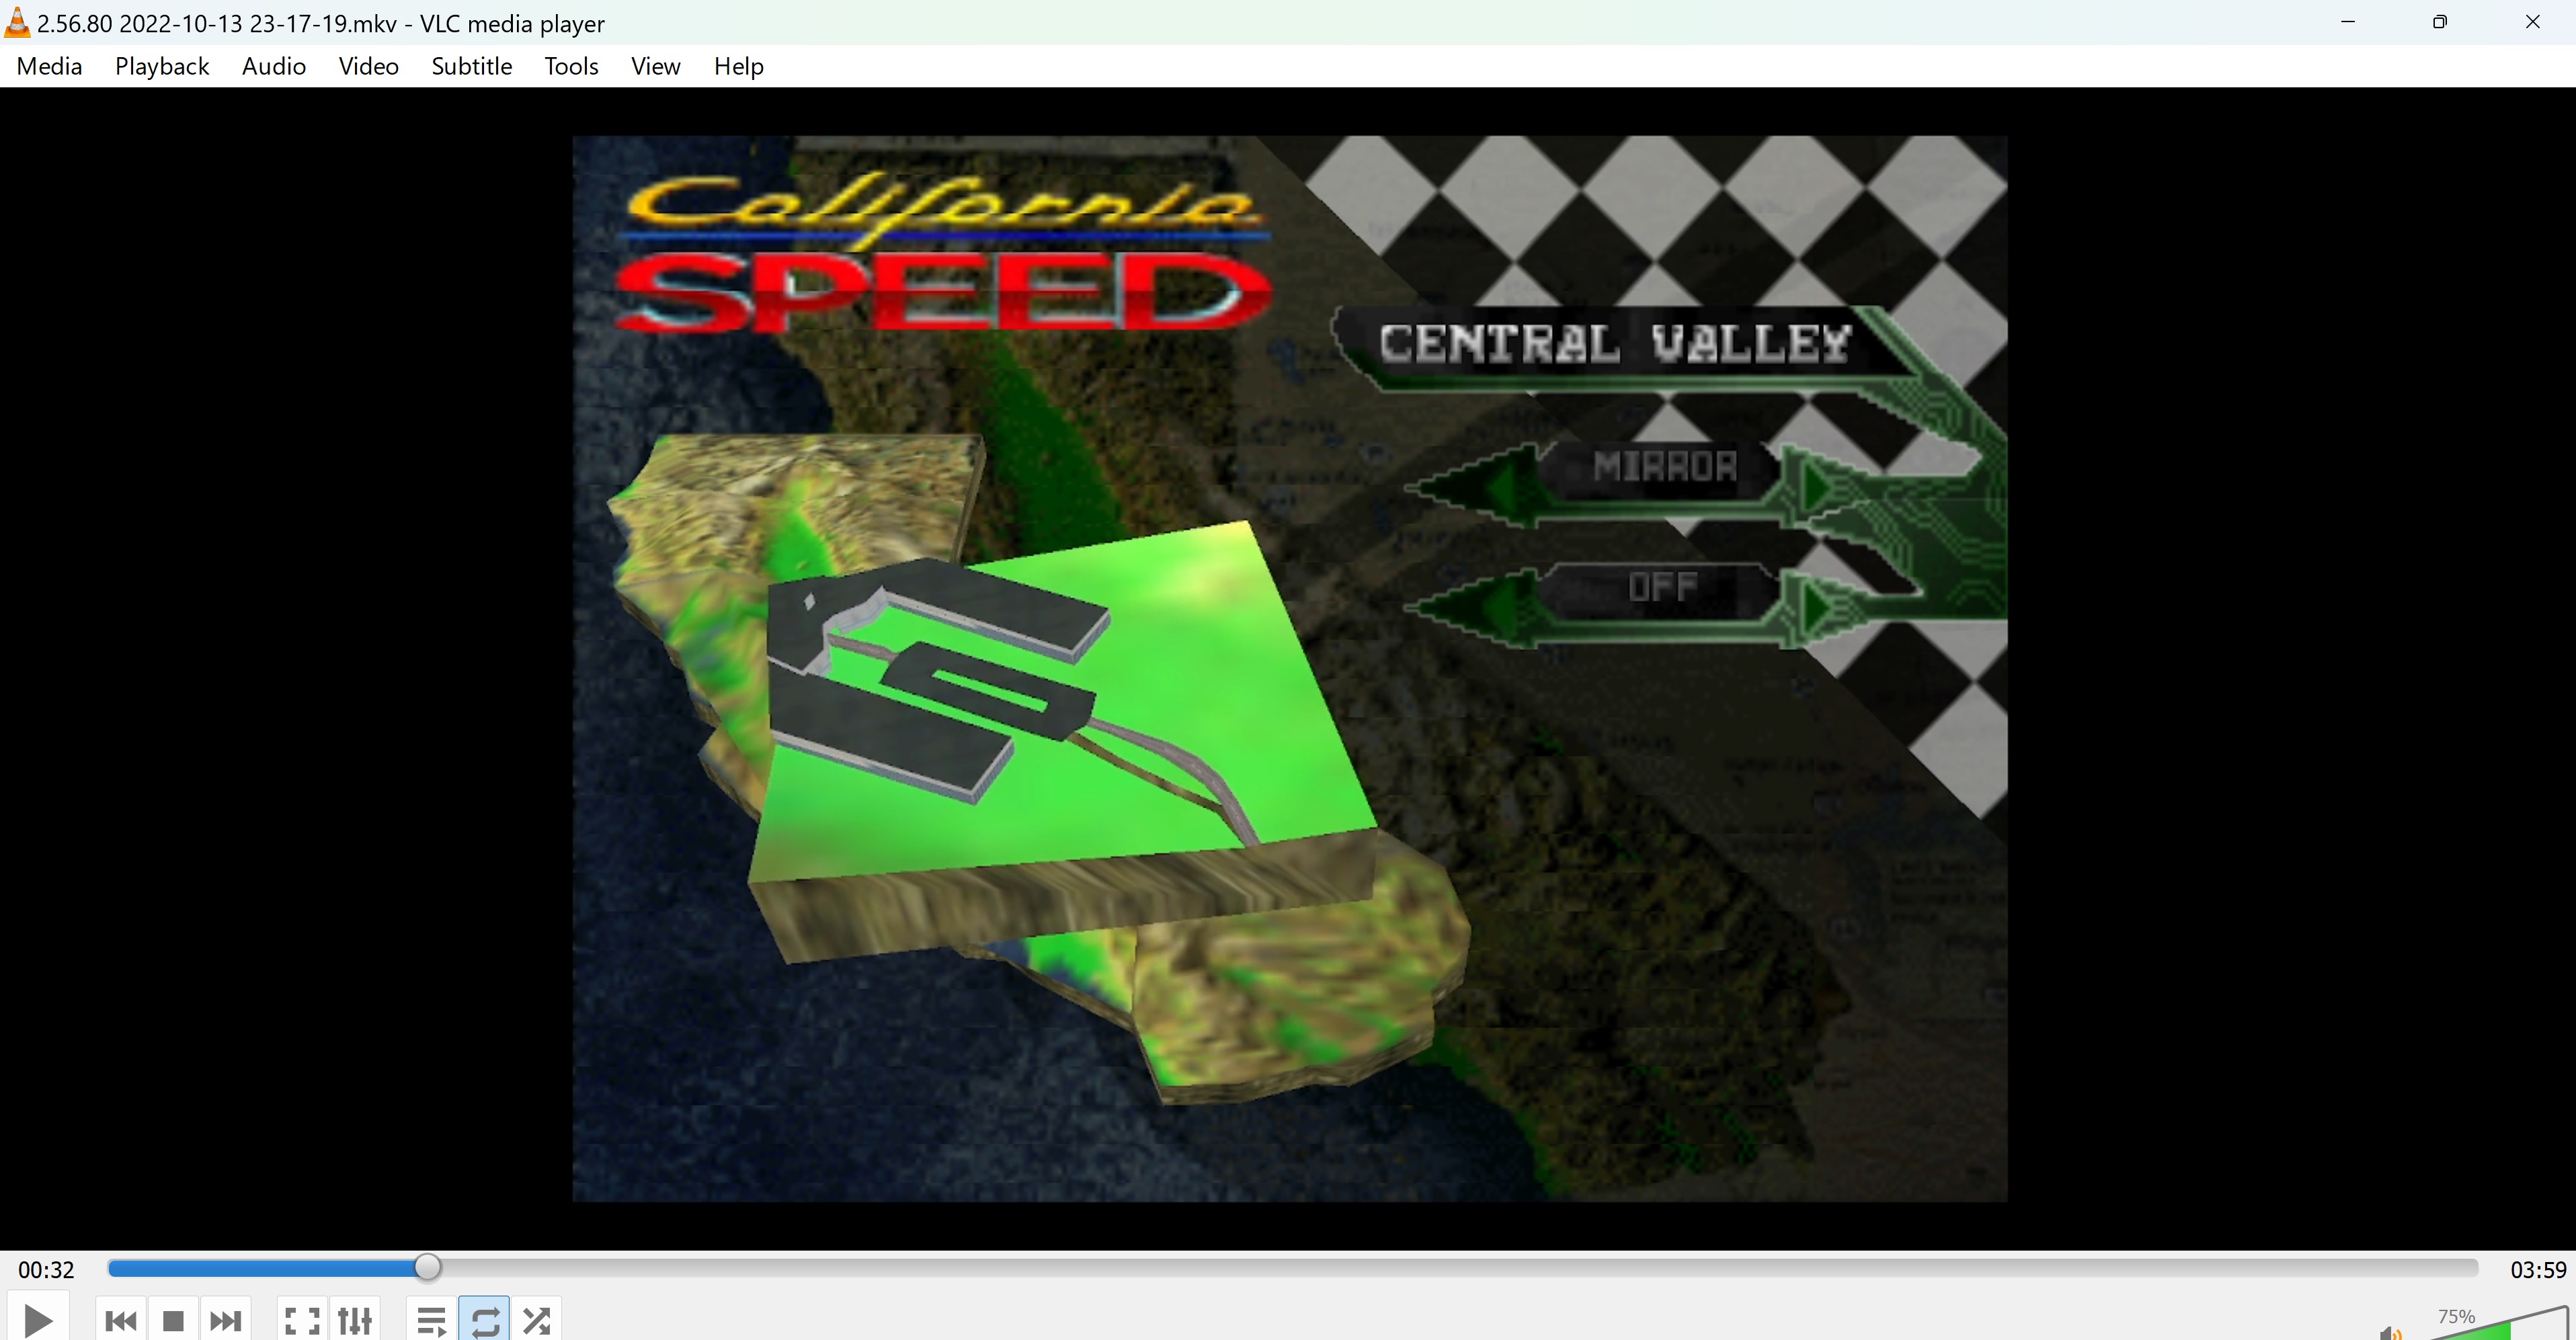 California Speed: Practice [Central Valley] time of 0:02:56.8